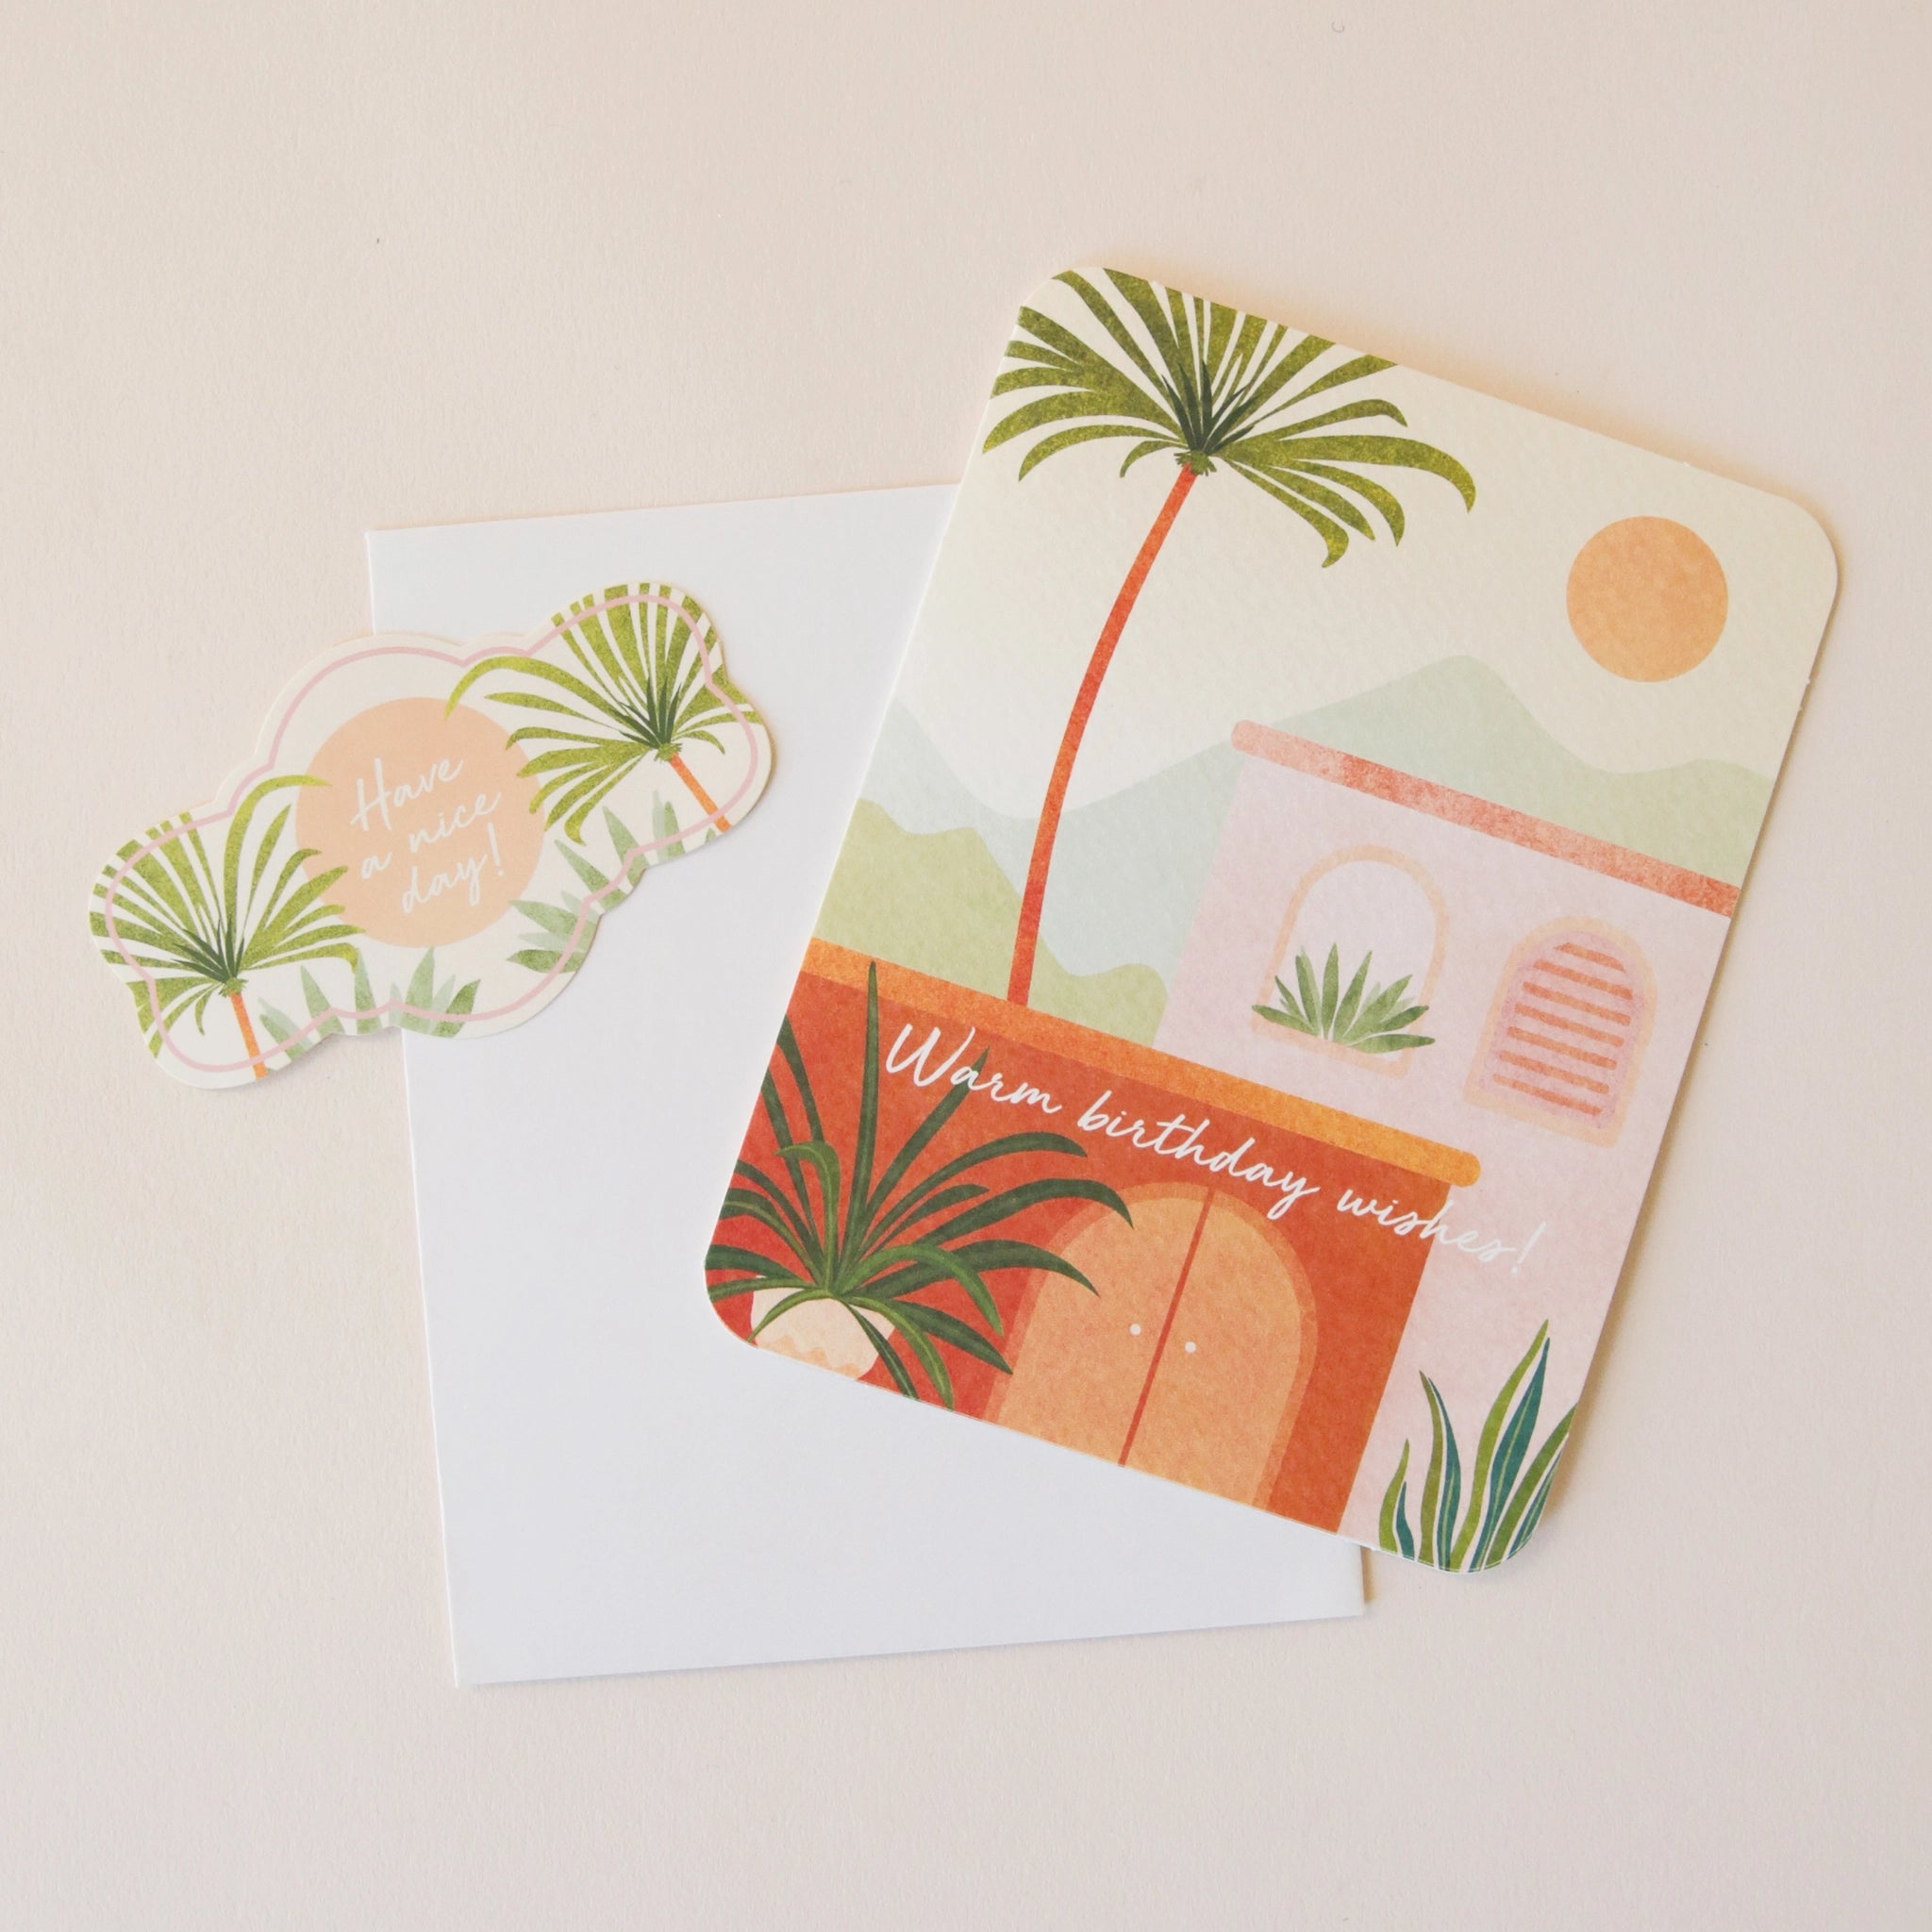 On a neutral background is a card with a sun and palm tree graphic along with a coordinating sticker and text along the front that reads, "Warm birthday wishes".